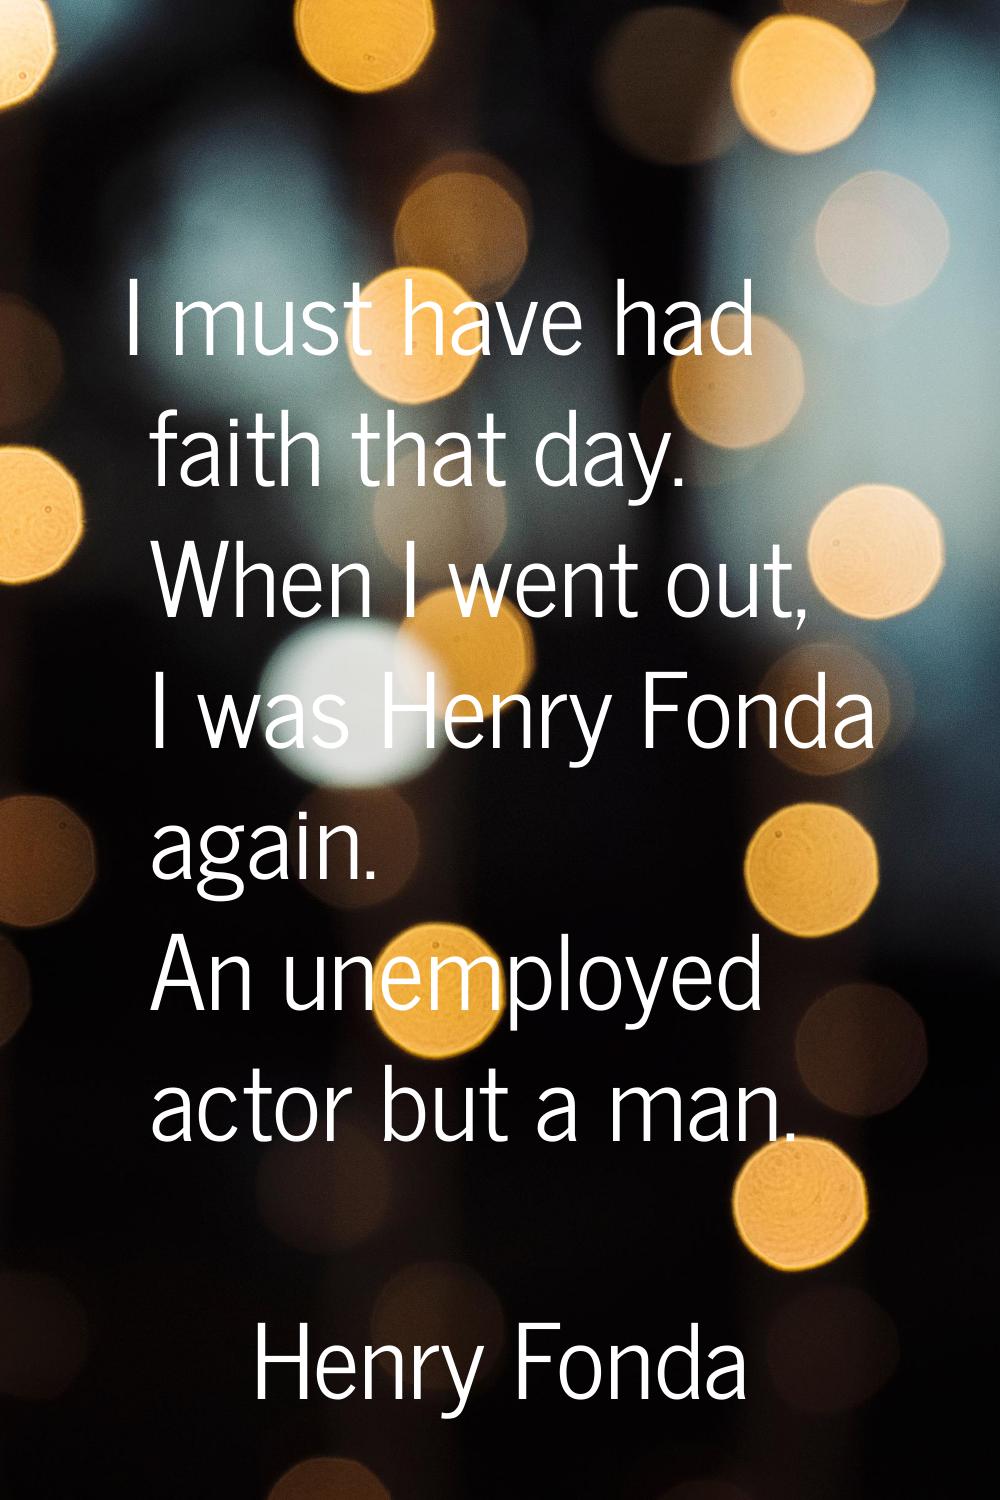 I must have had faith that day. When I went out, I was Henry Fonda again. An unemployed actor but a